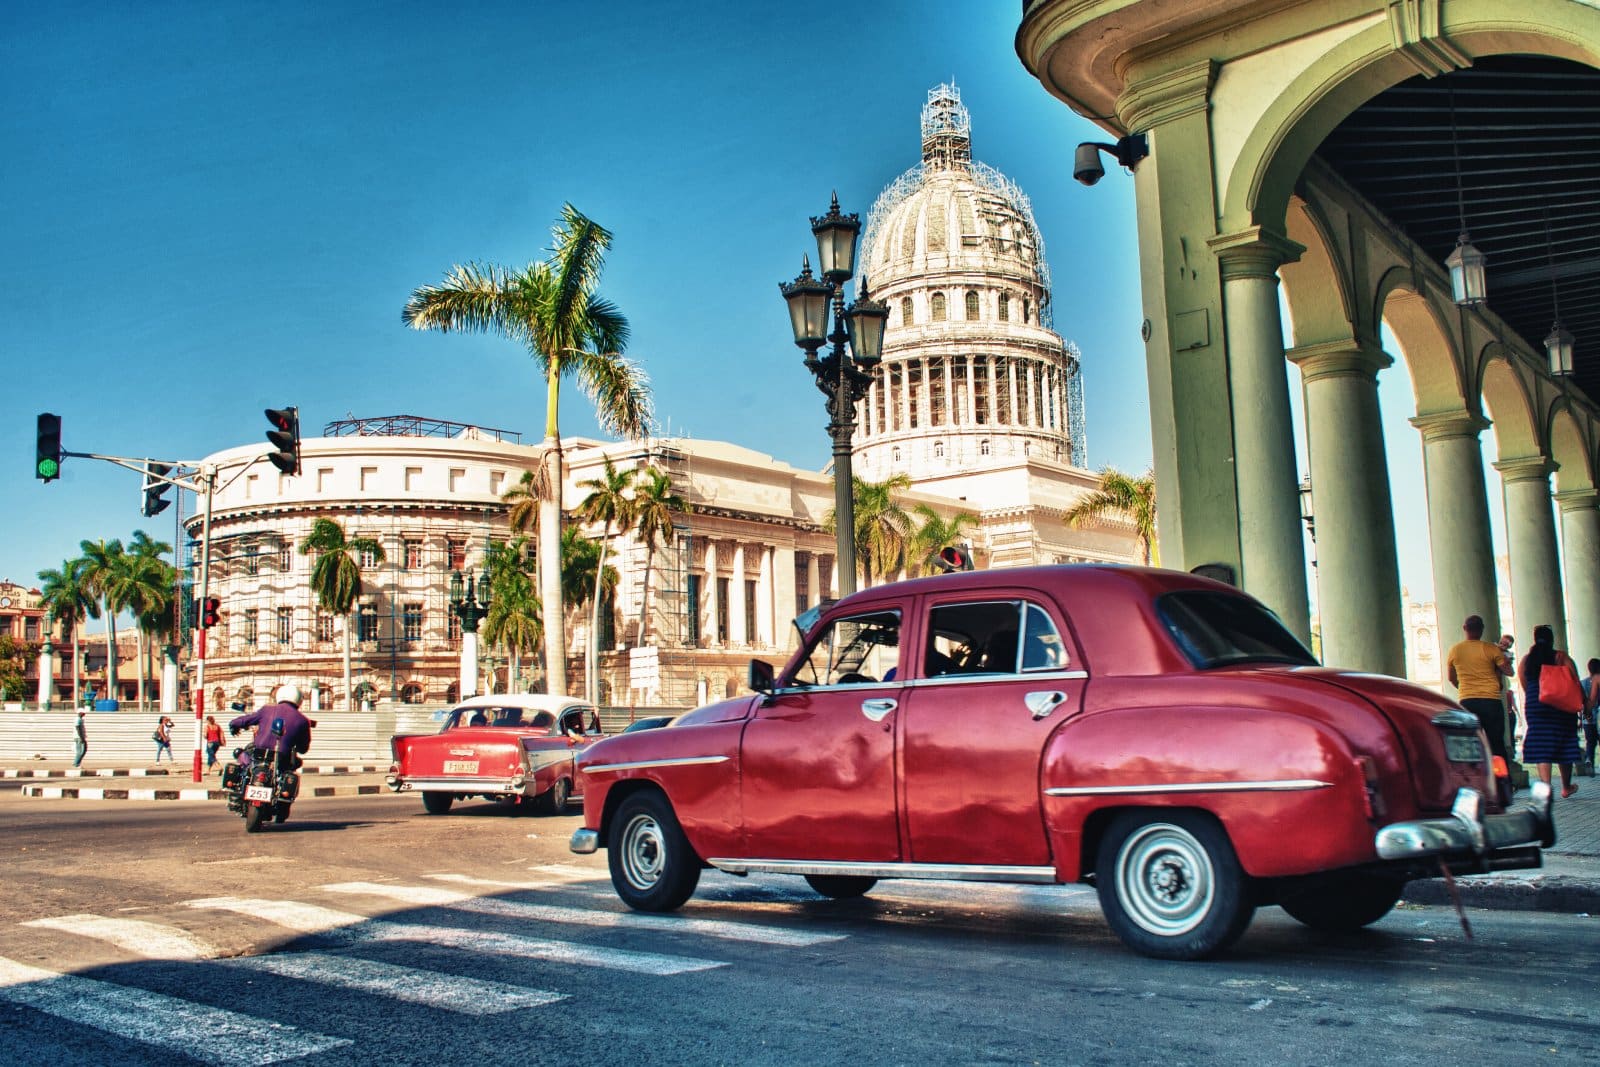 <p class="wp-caption-text">Image Credit: Shutterstock / javier gonzalez leyva</p>  <p>There’s a complex sentiment in Cuba where American tourists are seen as both needed for economic reasons and resented for their often superficial engagement with the culture.</p>